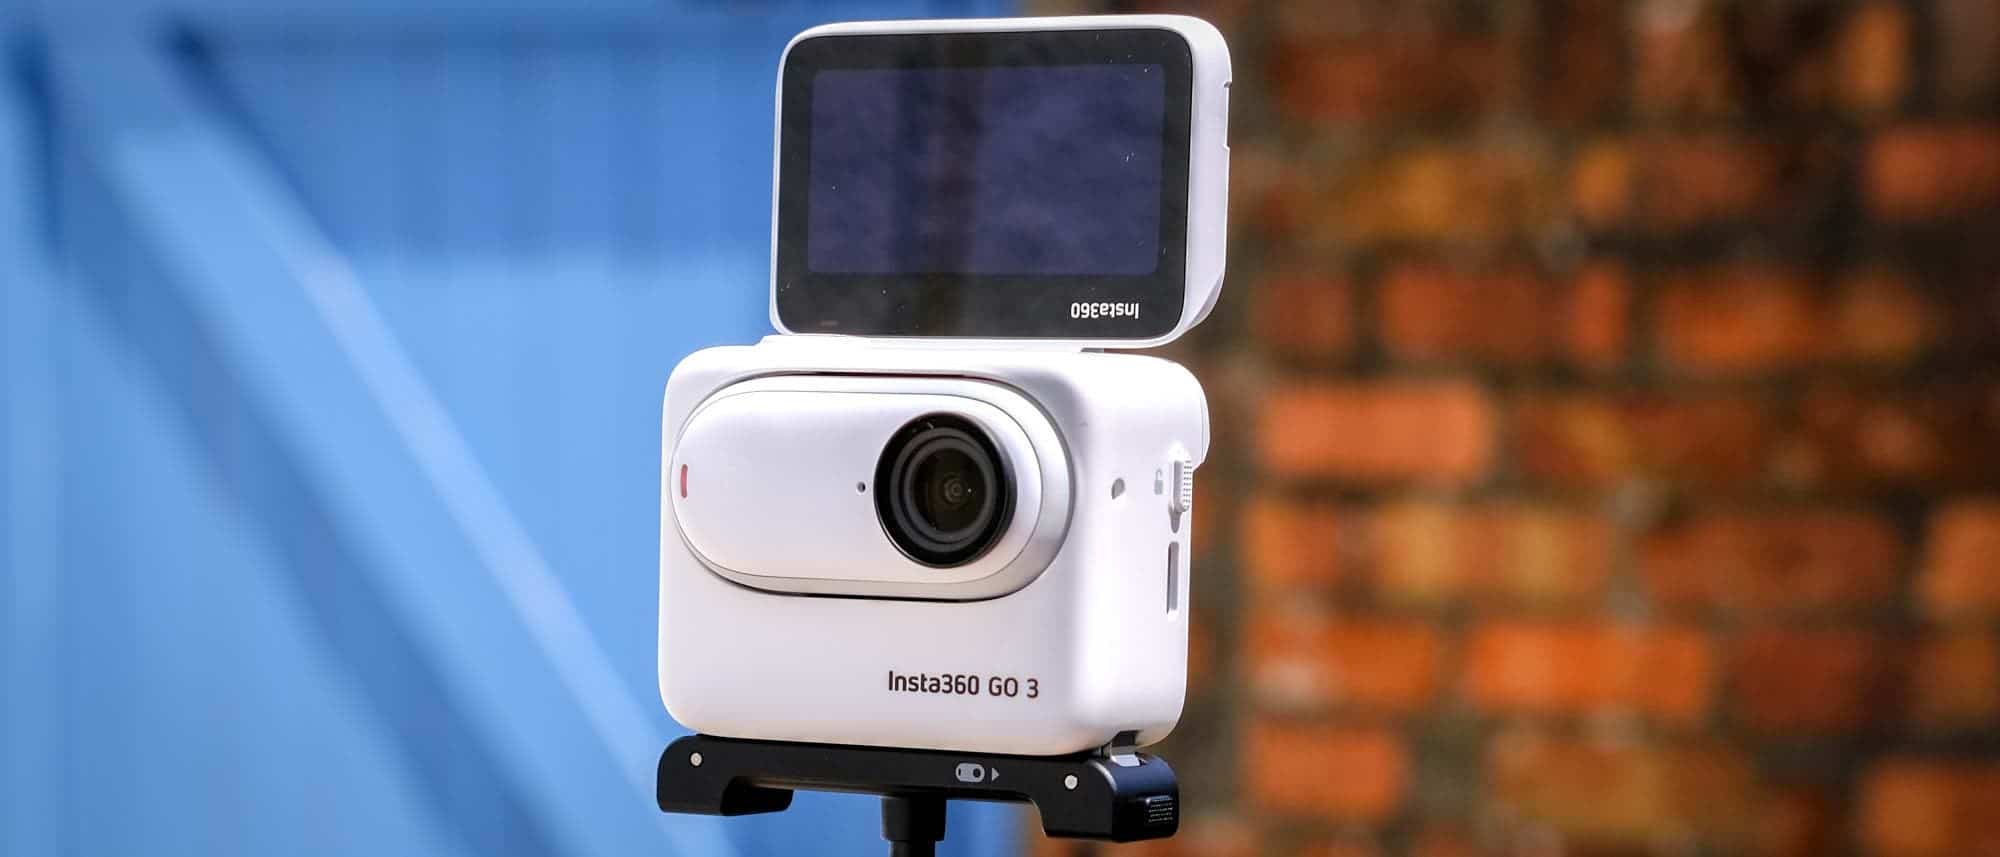 Review: The Insta360 GO 3 action camera is also a tiny vlogging camera